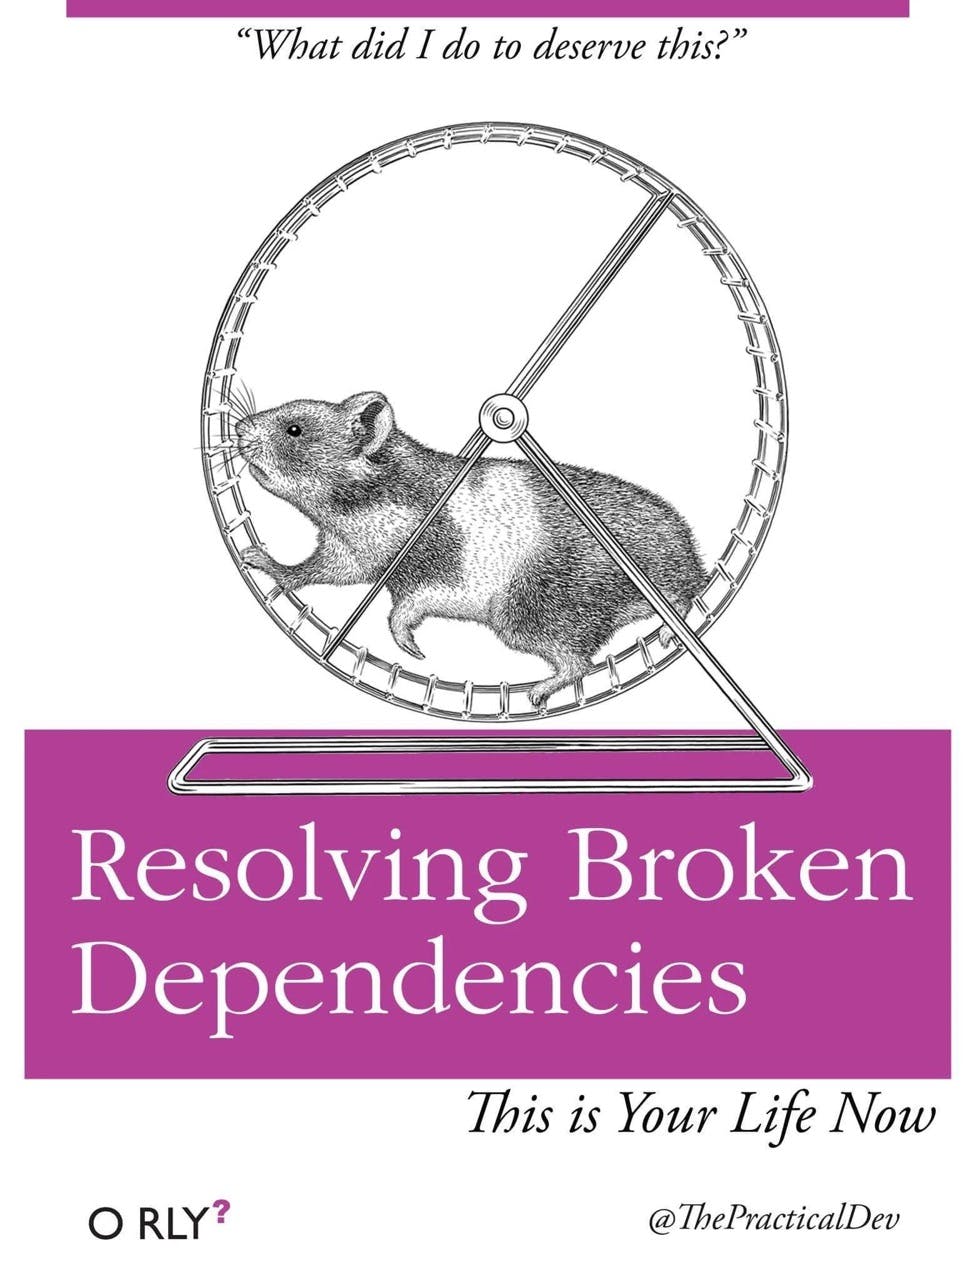 Resolving Broken Dependencies | What did I do to deserve this?